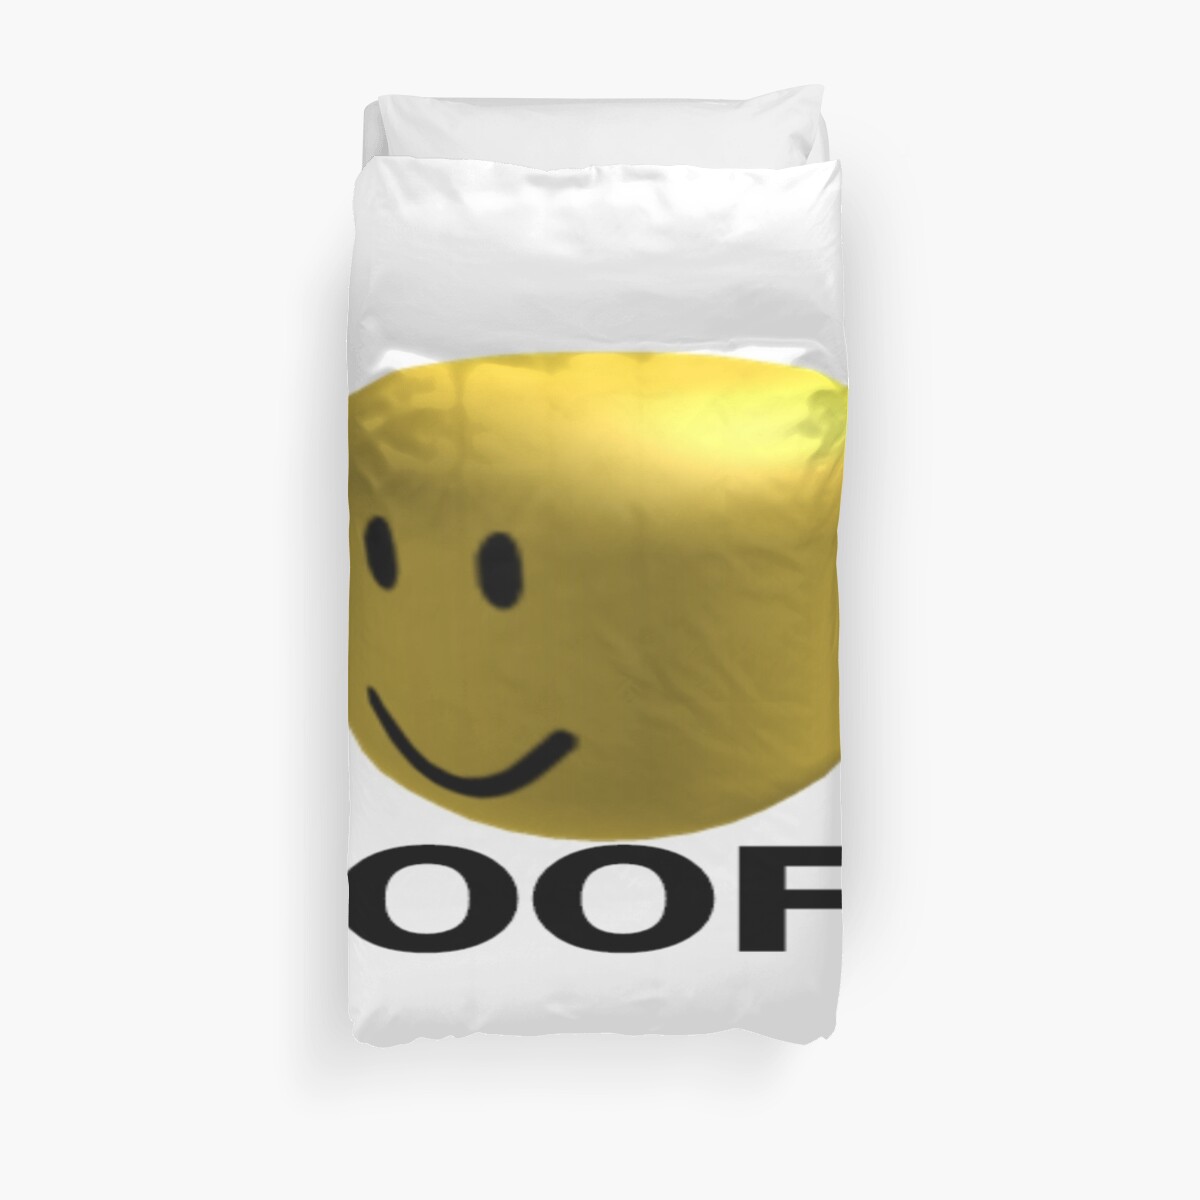 Roblox Death Sound Duvet Cover By Colonelsanders Redbubble - oof city new intro roblox